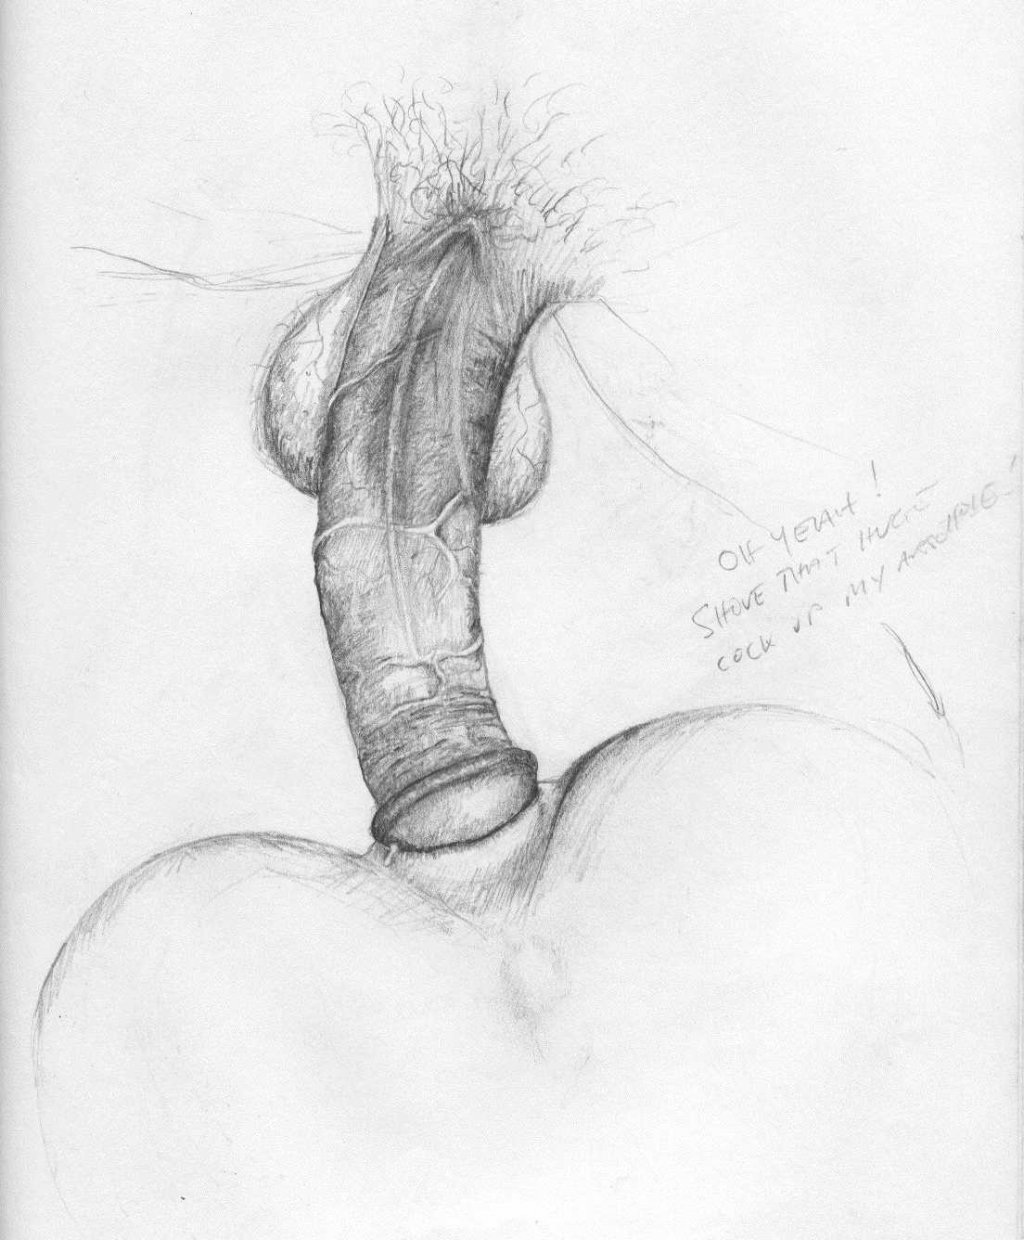 More related shemail sketch art porno.